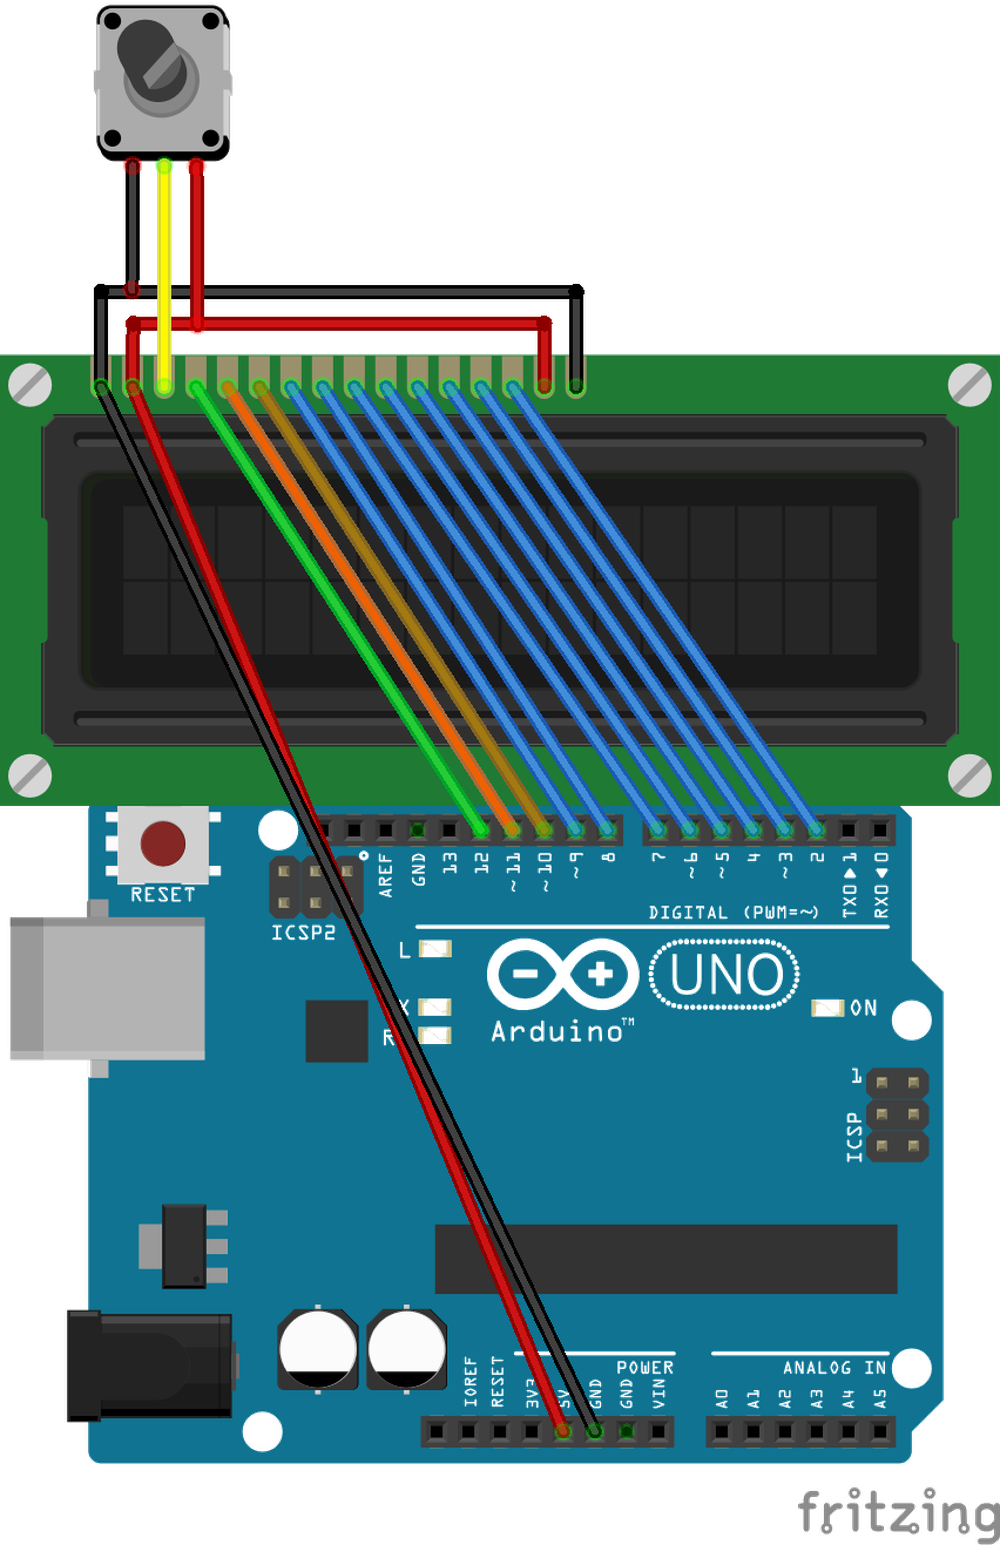 LCD1602 and arduino